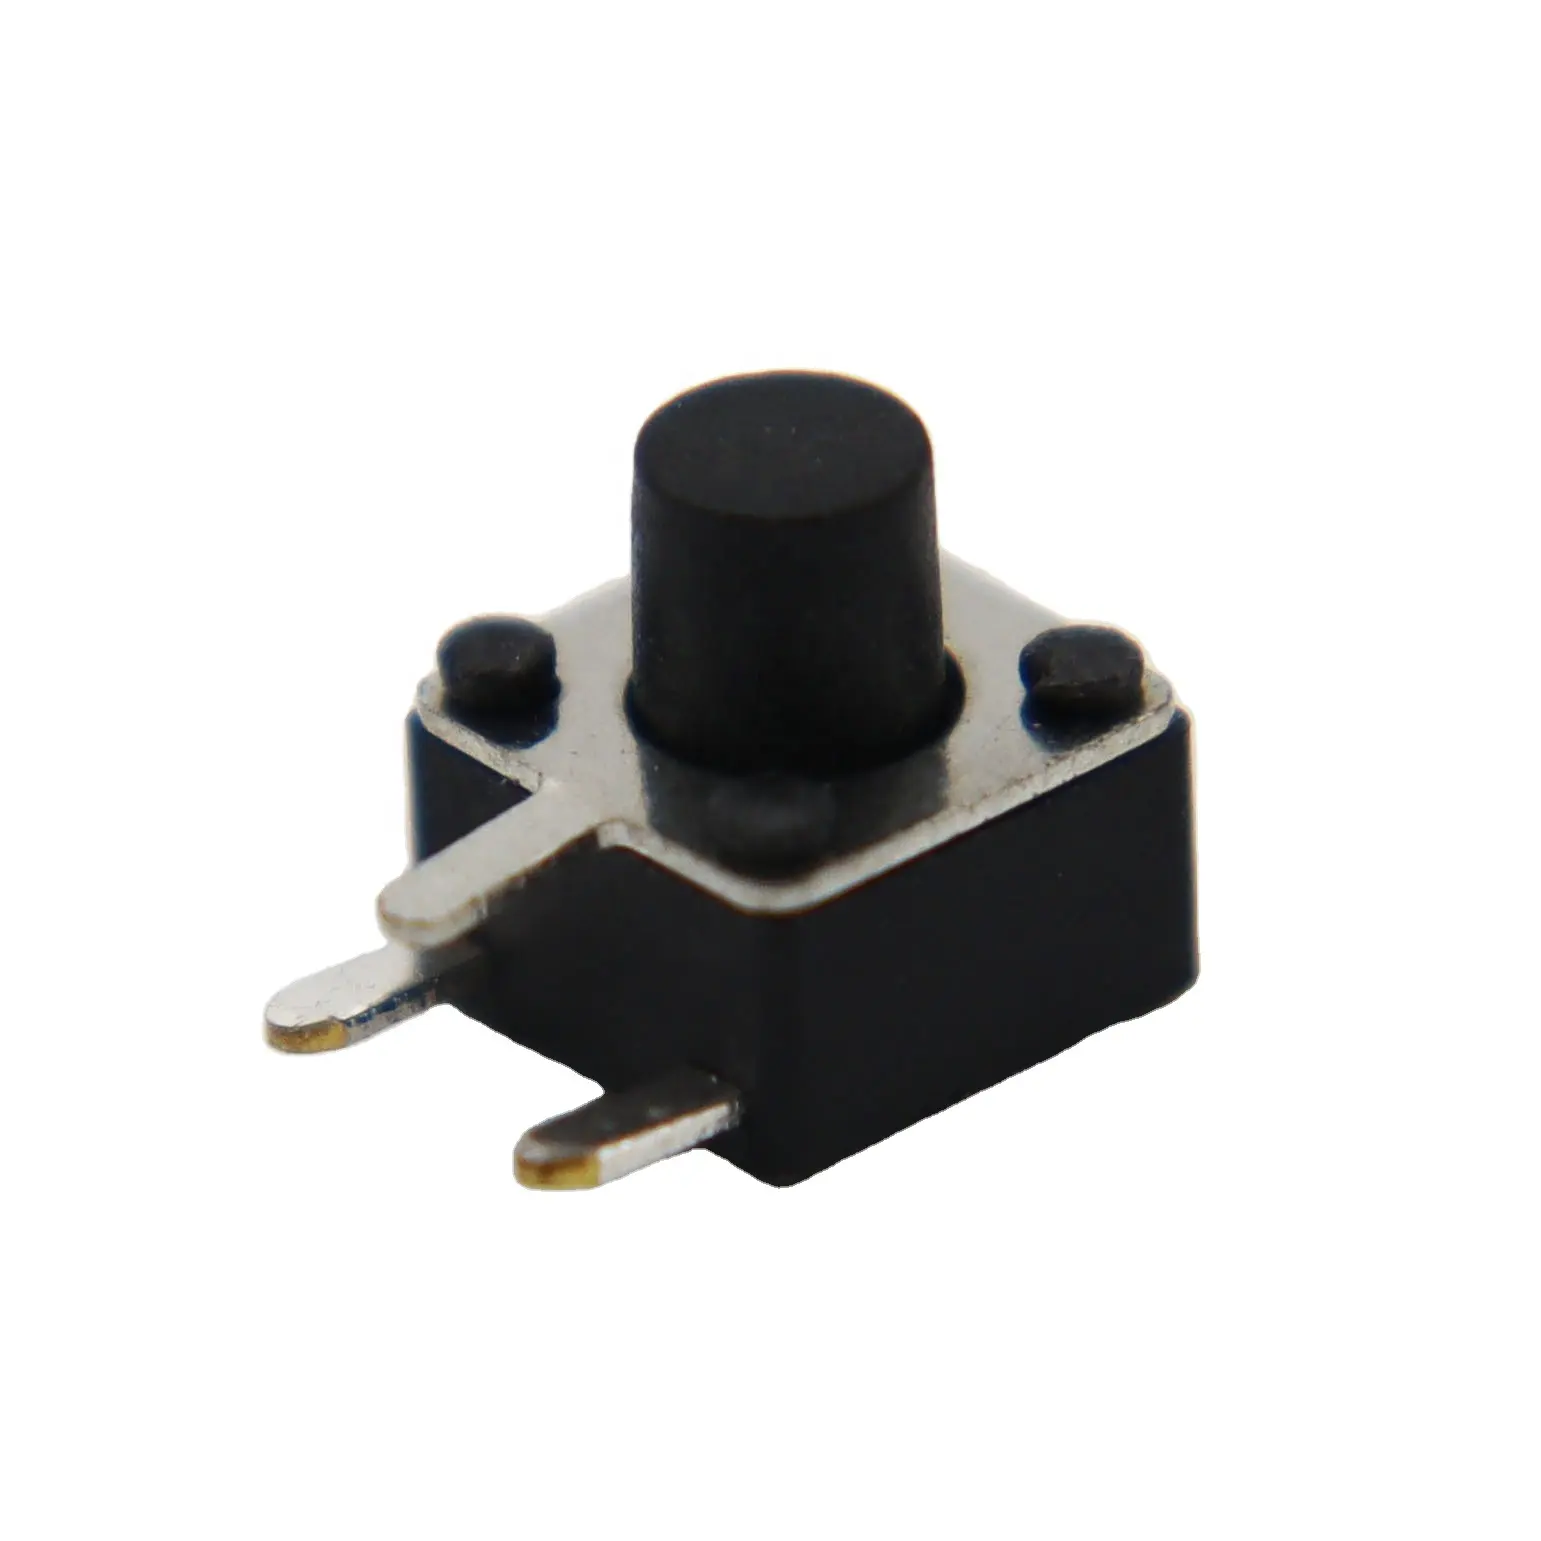 Factory price Tact switch KFC-064 SMT 3 pins black button 0.5A/250V 4.6*4.6 tactile switch